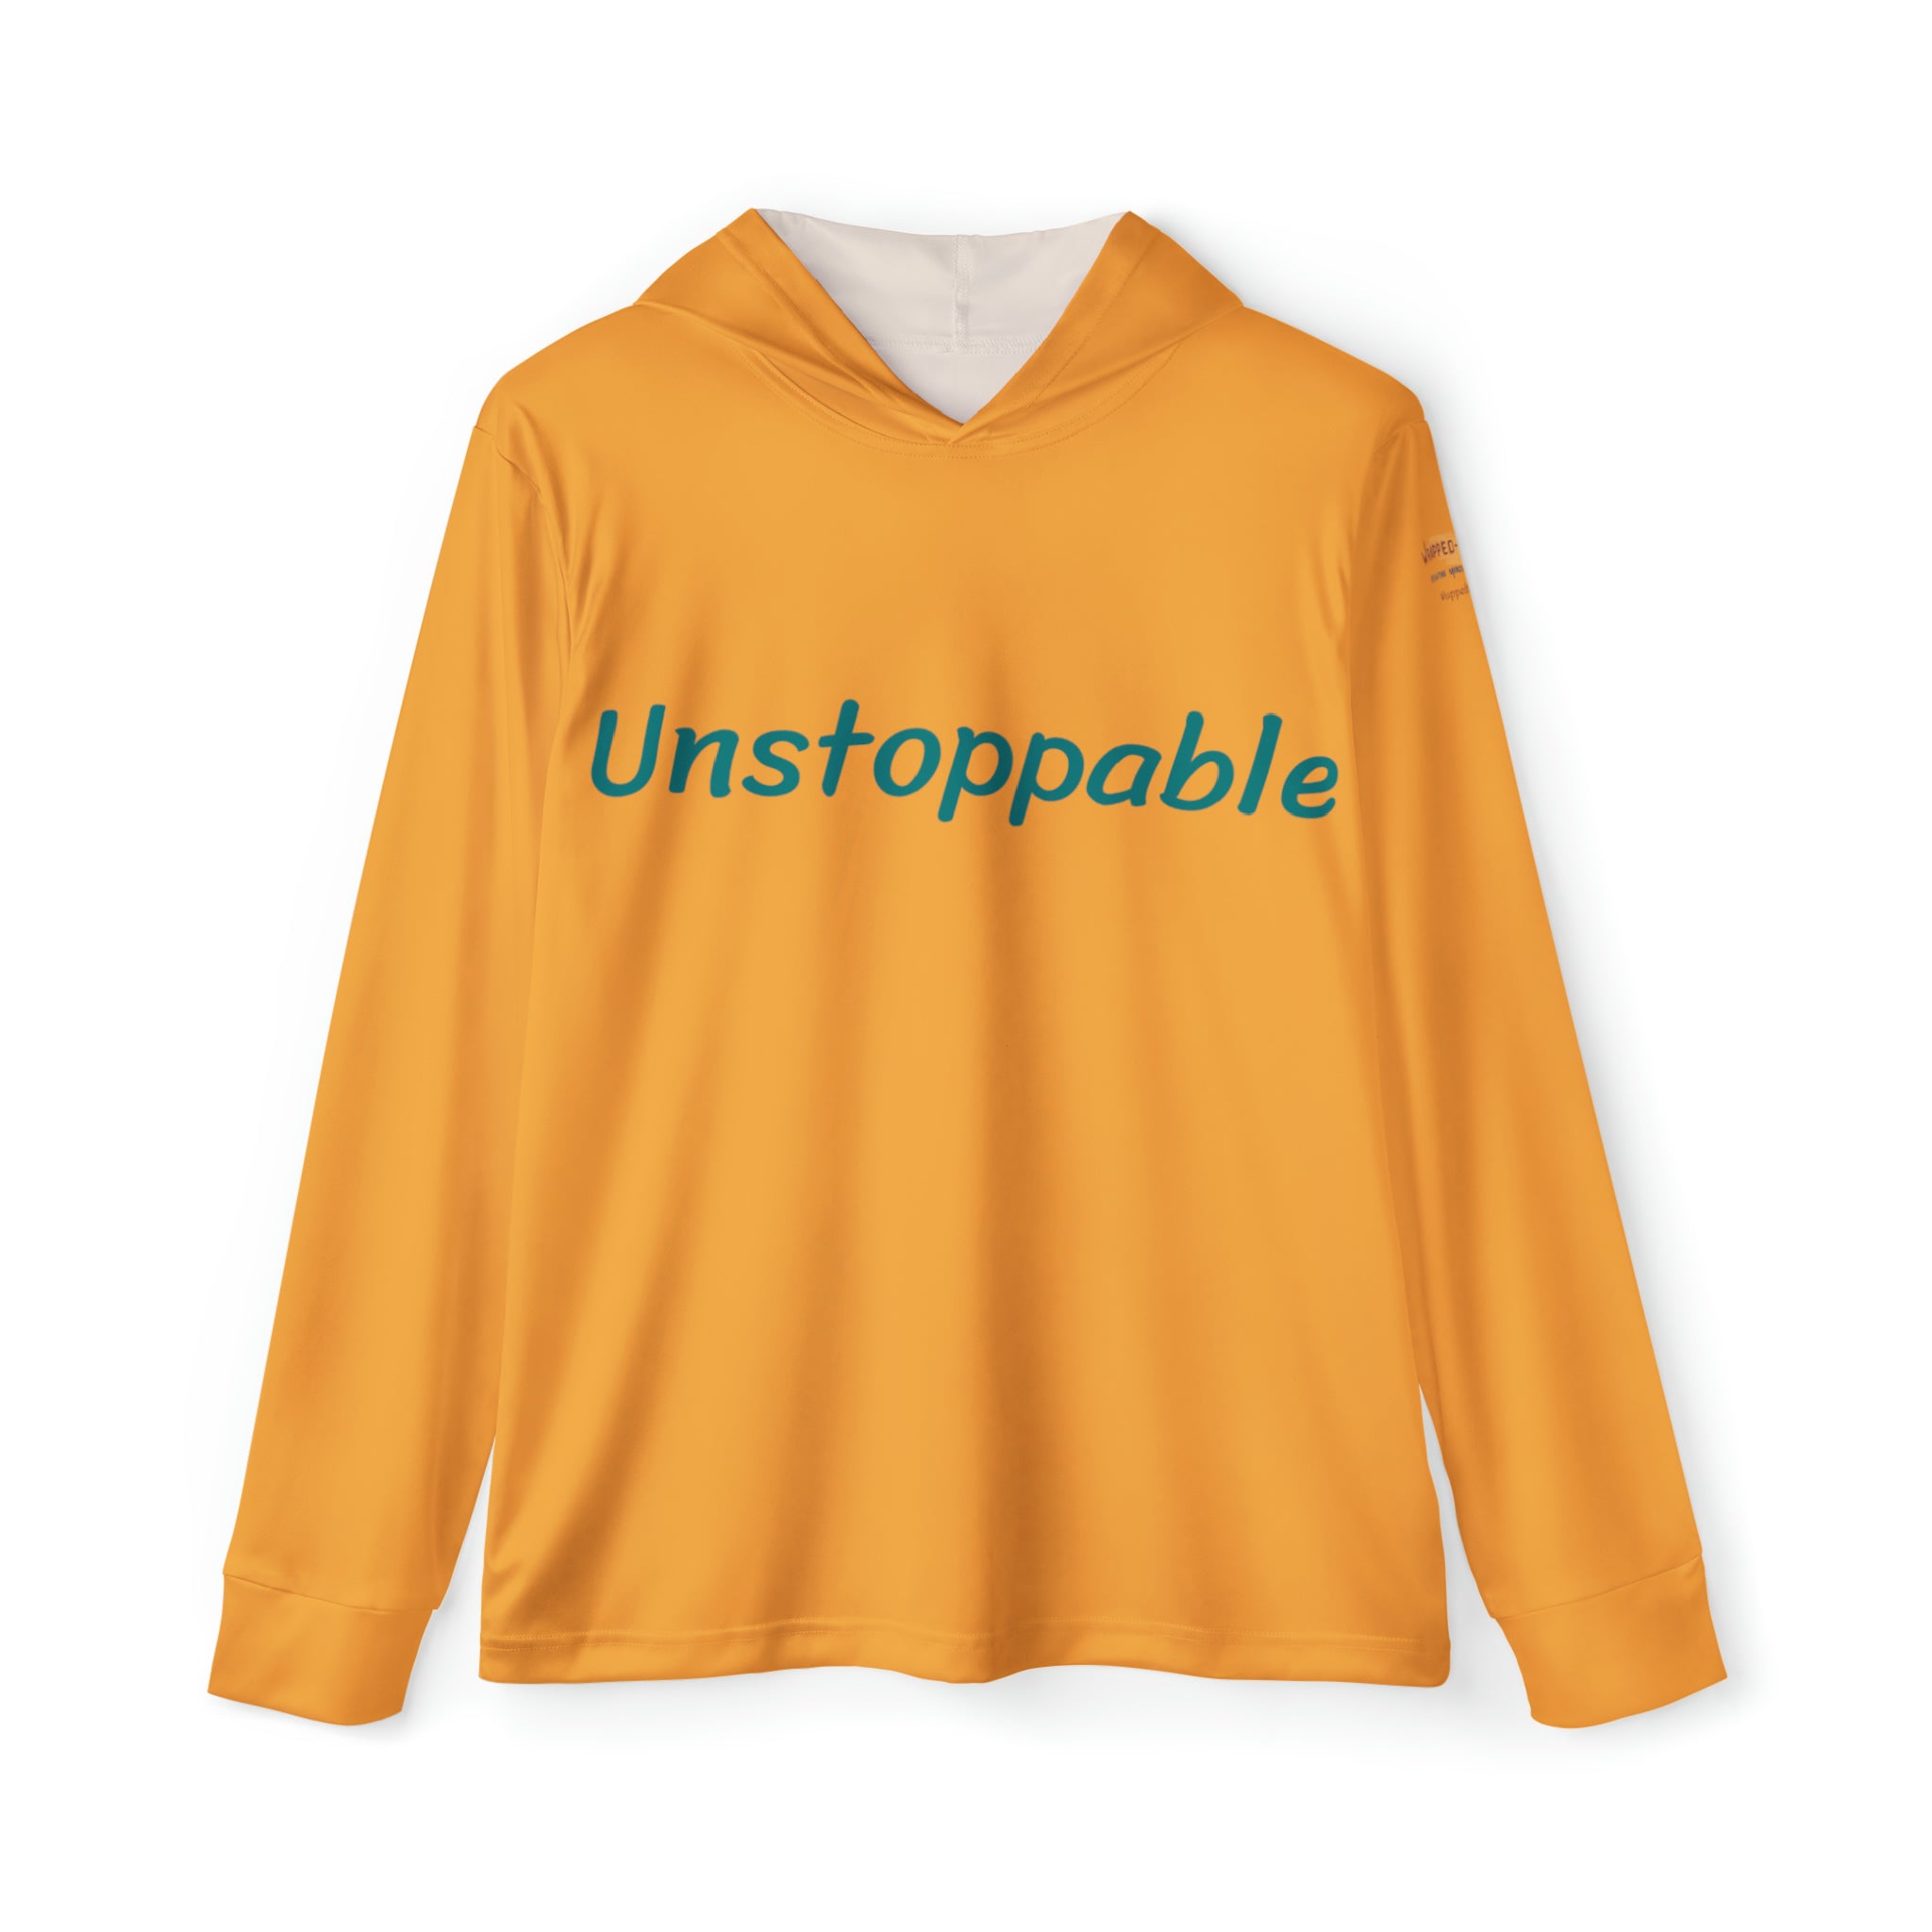 Unstoppable Men's Warmup Hoodie: Break Barriers Activewear Durable Fabric Made in USA Men's Hoodie Mental Health Support Moisture-wicking Performance Apparel Quality Control Sports Warmup UPF 50+ All Over Prints 14947950404741308792_2048 Printify